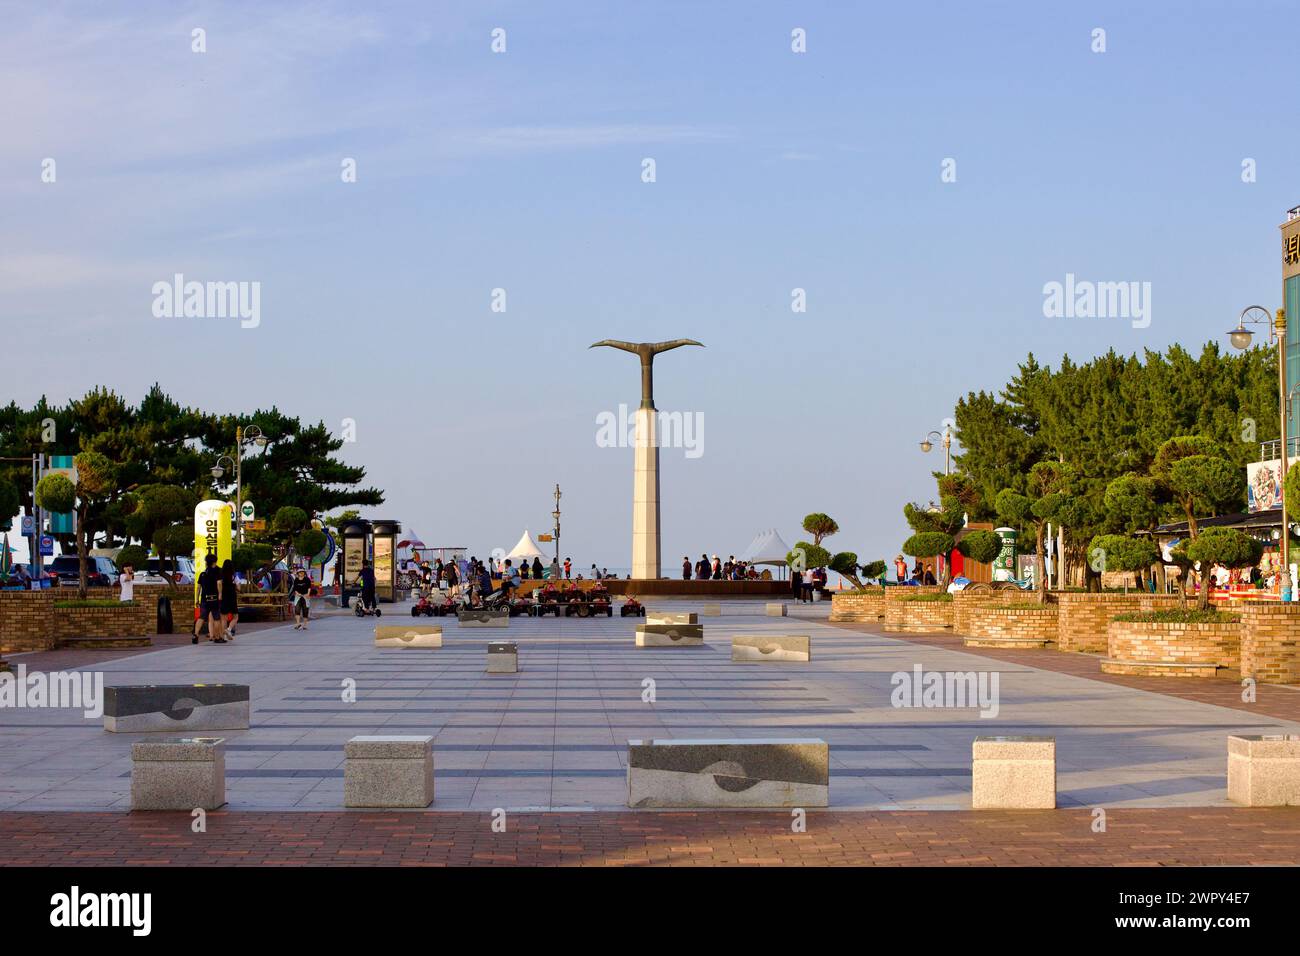 Yangyang County, South Korea - July 30, 2019: A lively late summer day in the courtyard leading to Naksan Beach, with a distinctive metal statue resem Stock Photo